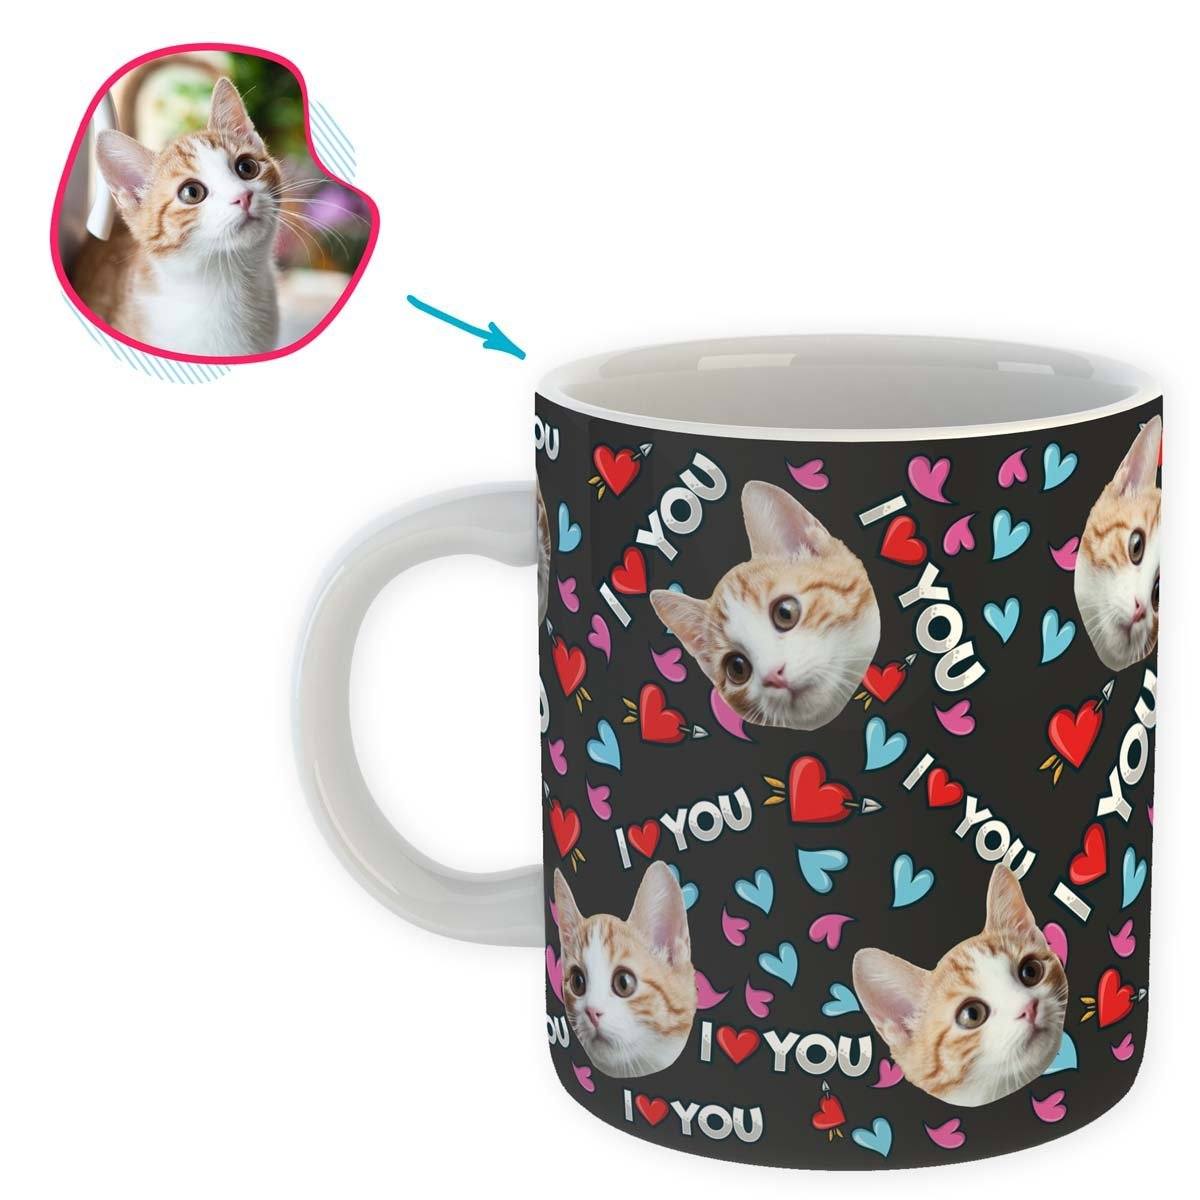 dark Love You mug personalized with photo of face printed on it